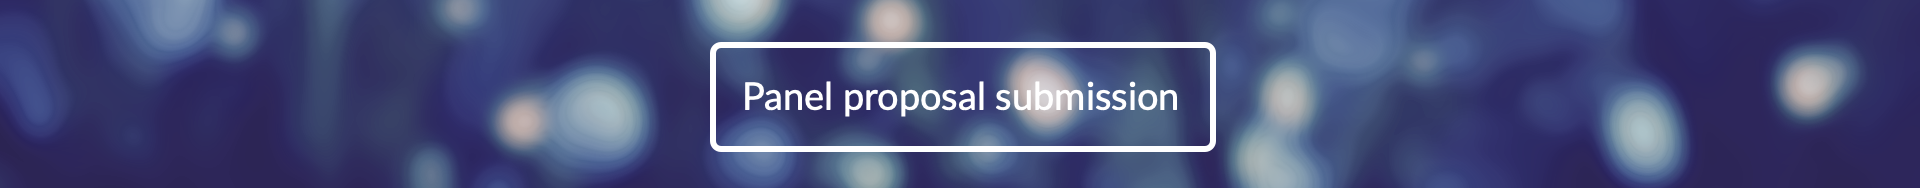 Panel proposal submission